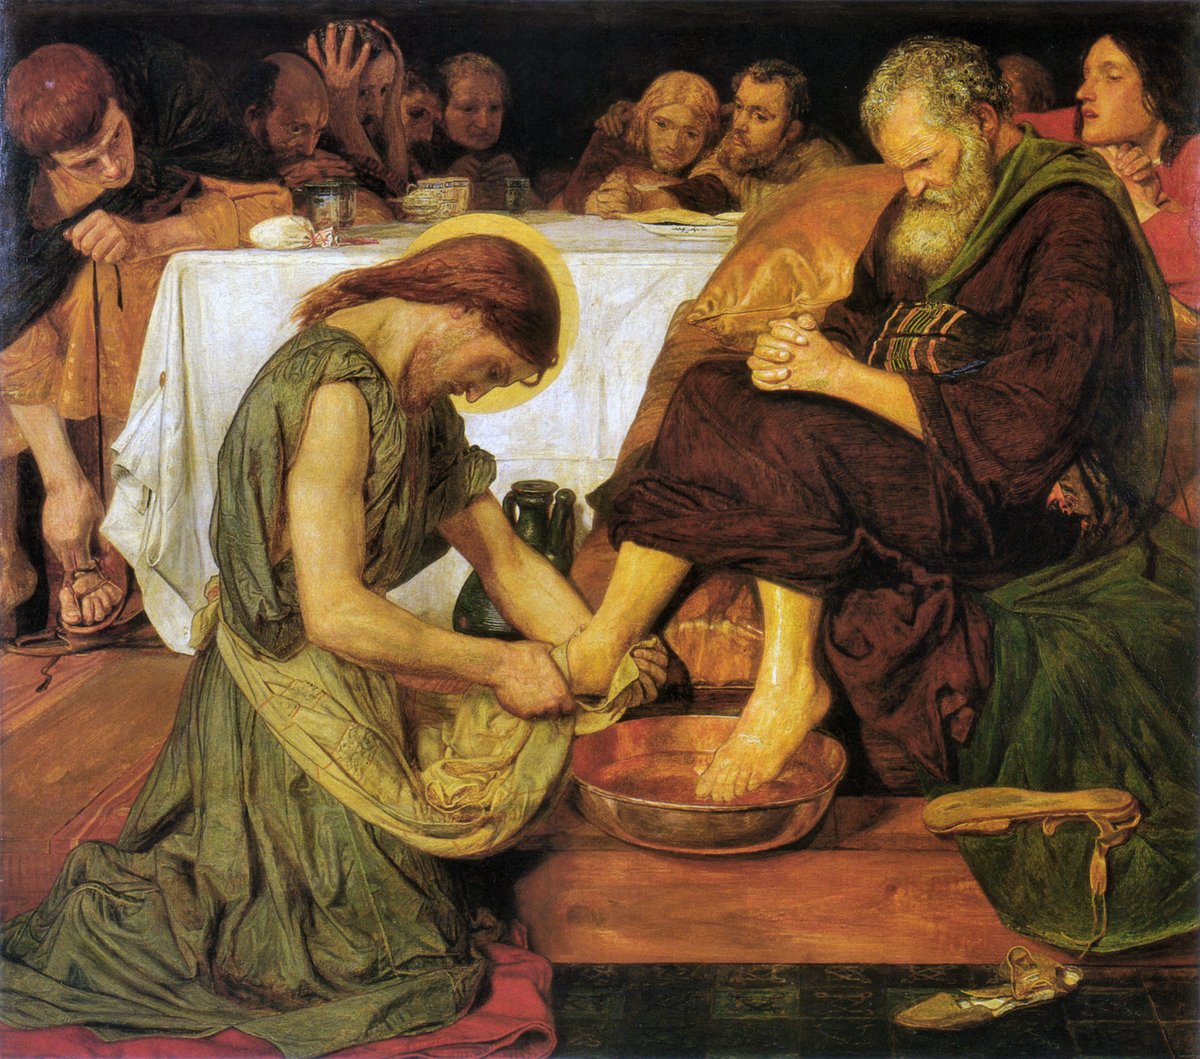 Gospel: On #HolyThursday, Jesus shows his disciples what servant-leadership means: 'If I, therefore, the master and teacher, have washed your feet, you ought to wash one another’s feet. I have given you a model to follow, so that as I have done for you, you should also do.”